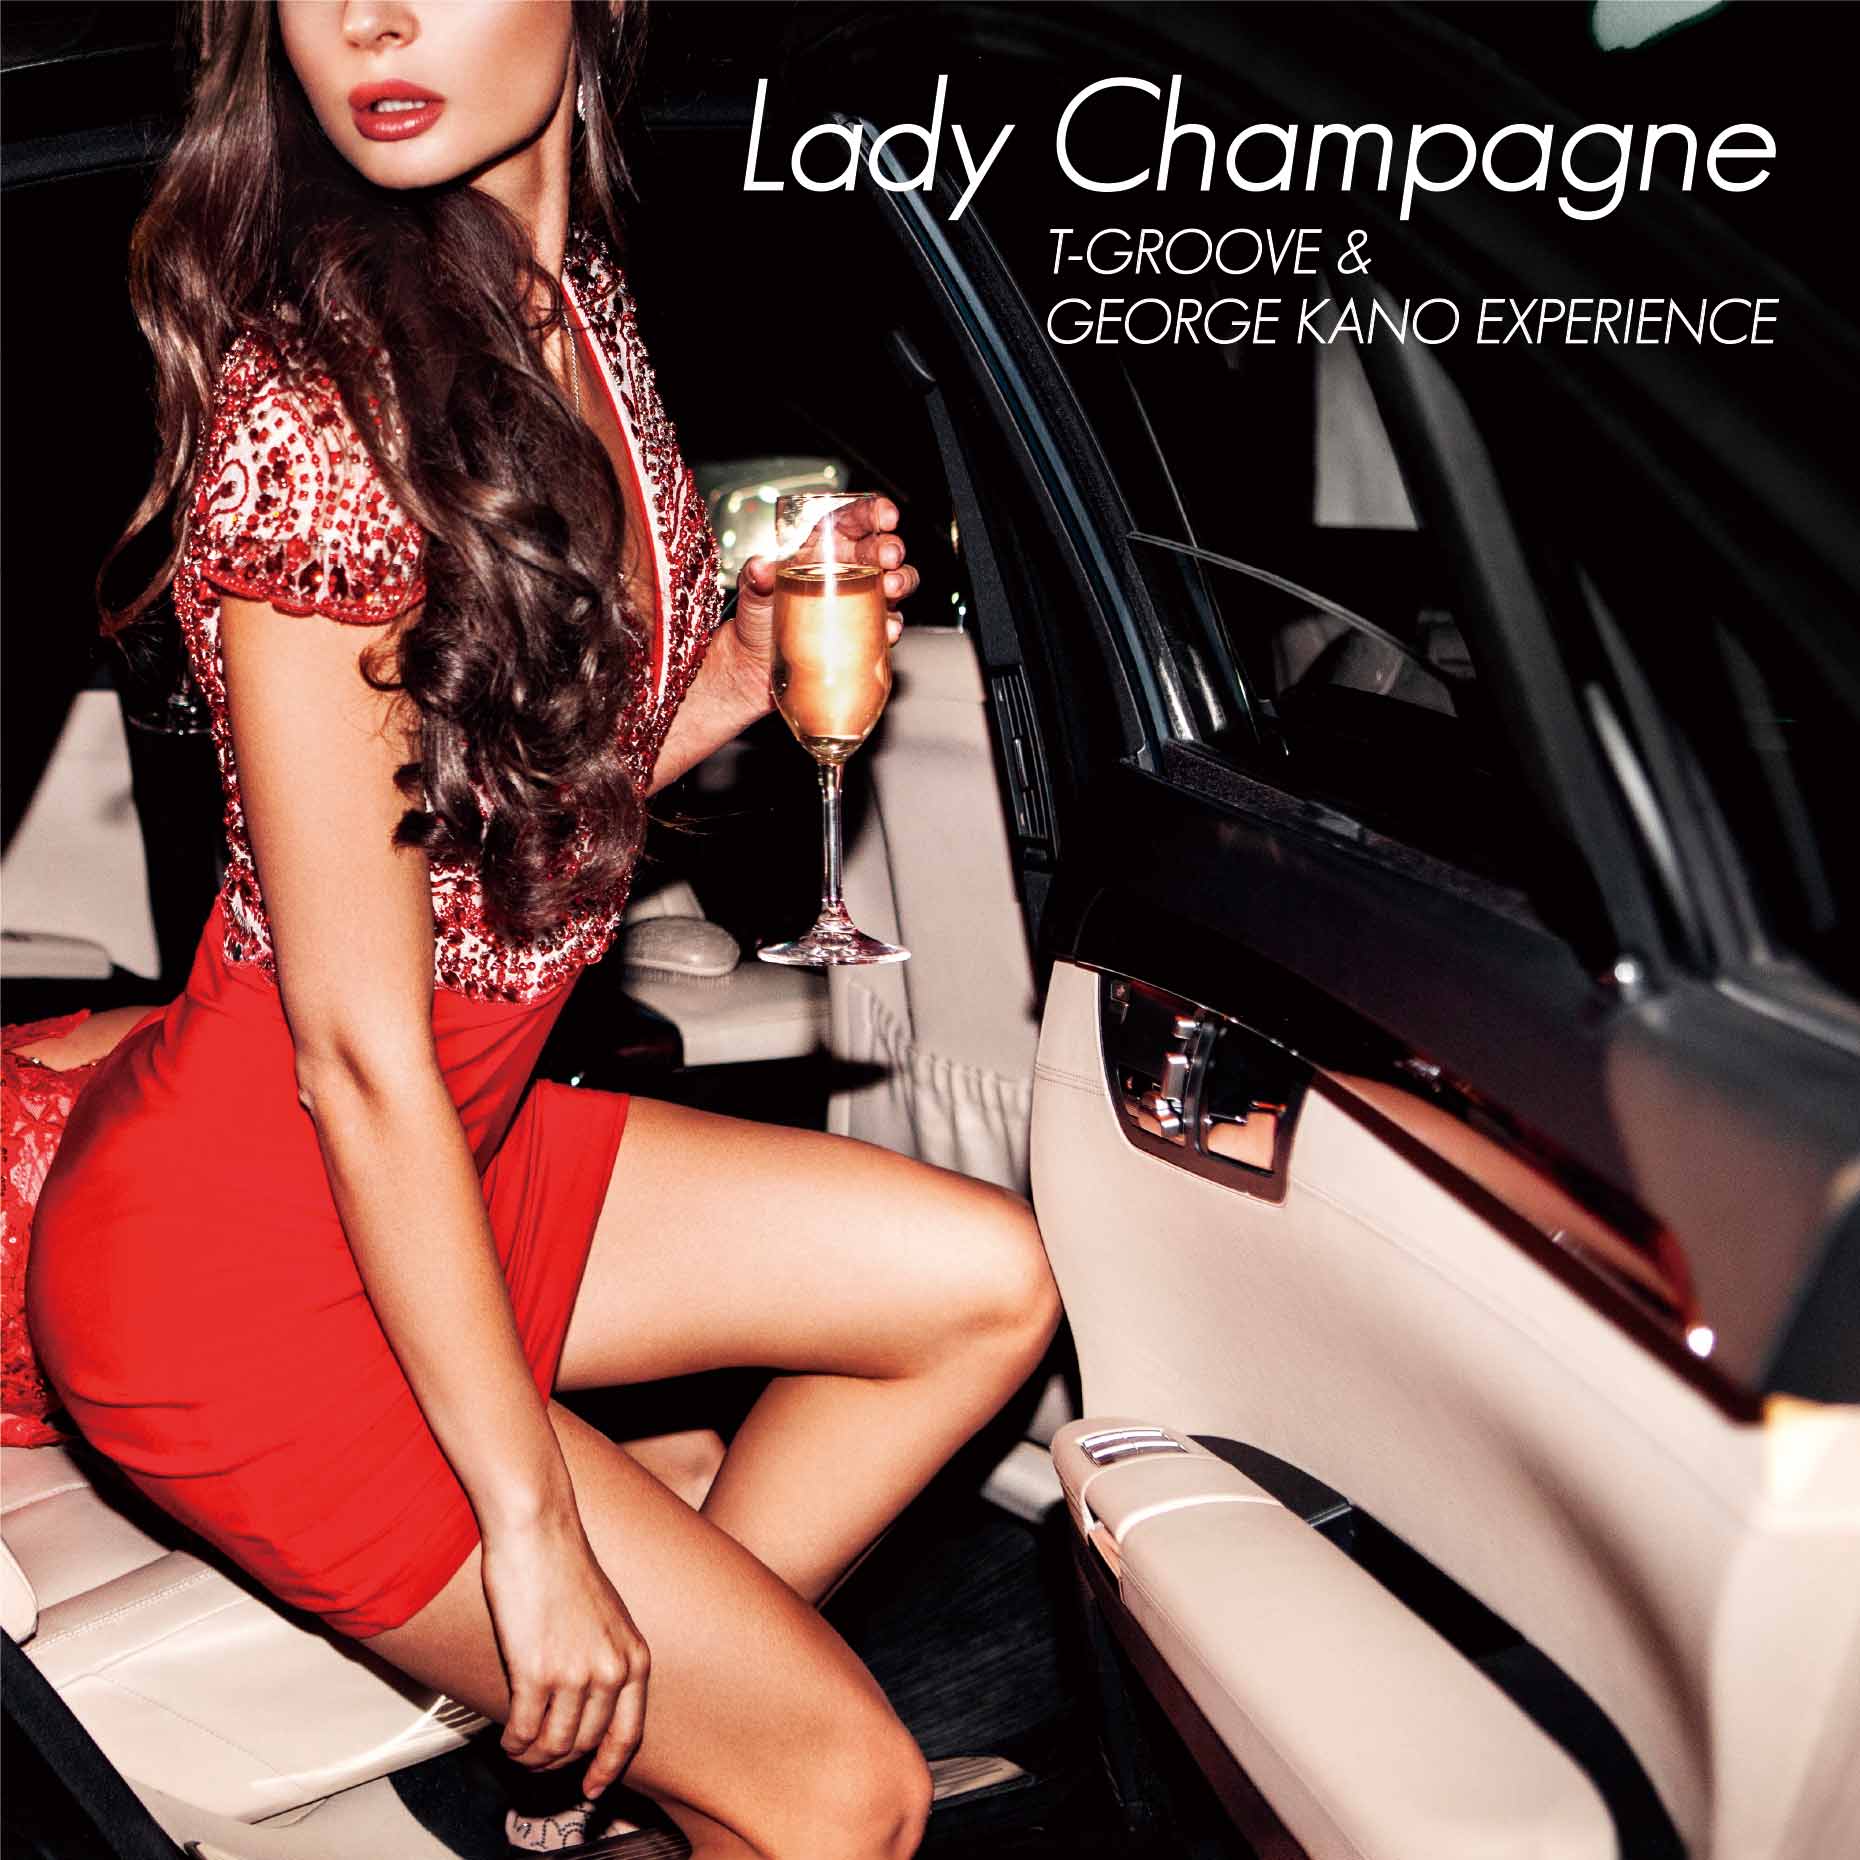 T-GROOVE & GEORGE KANO EXPERIENCE「Lady Champagne」